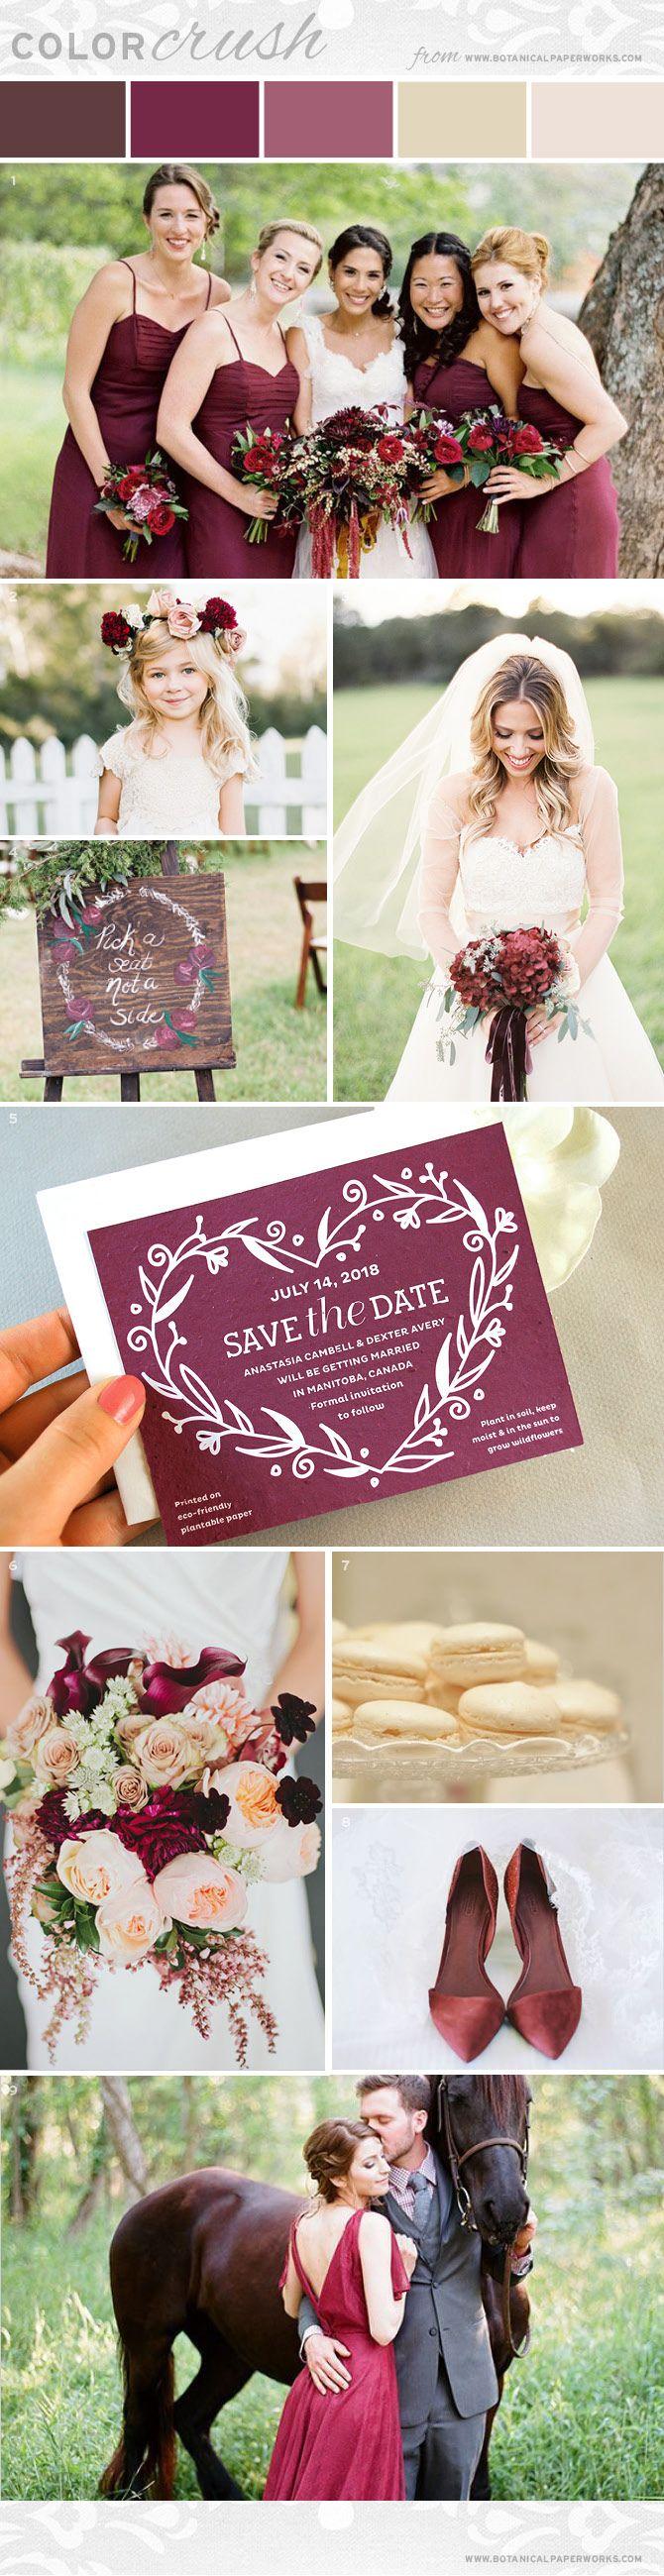 Mariage - {inspiration Board} Color Crush - Burgundy, Woodsy Browns   Neutral Creams